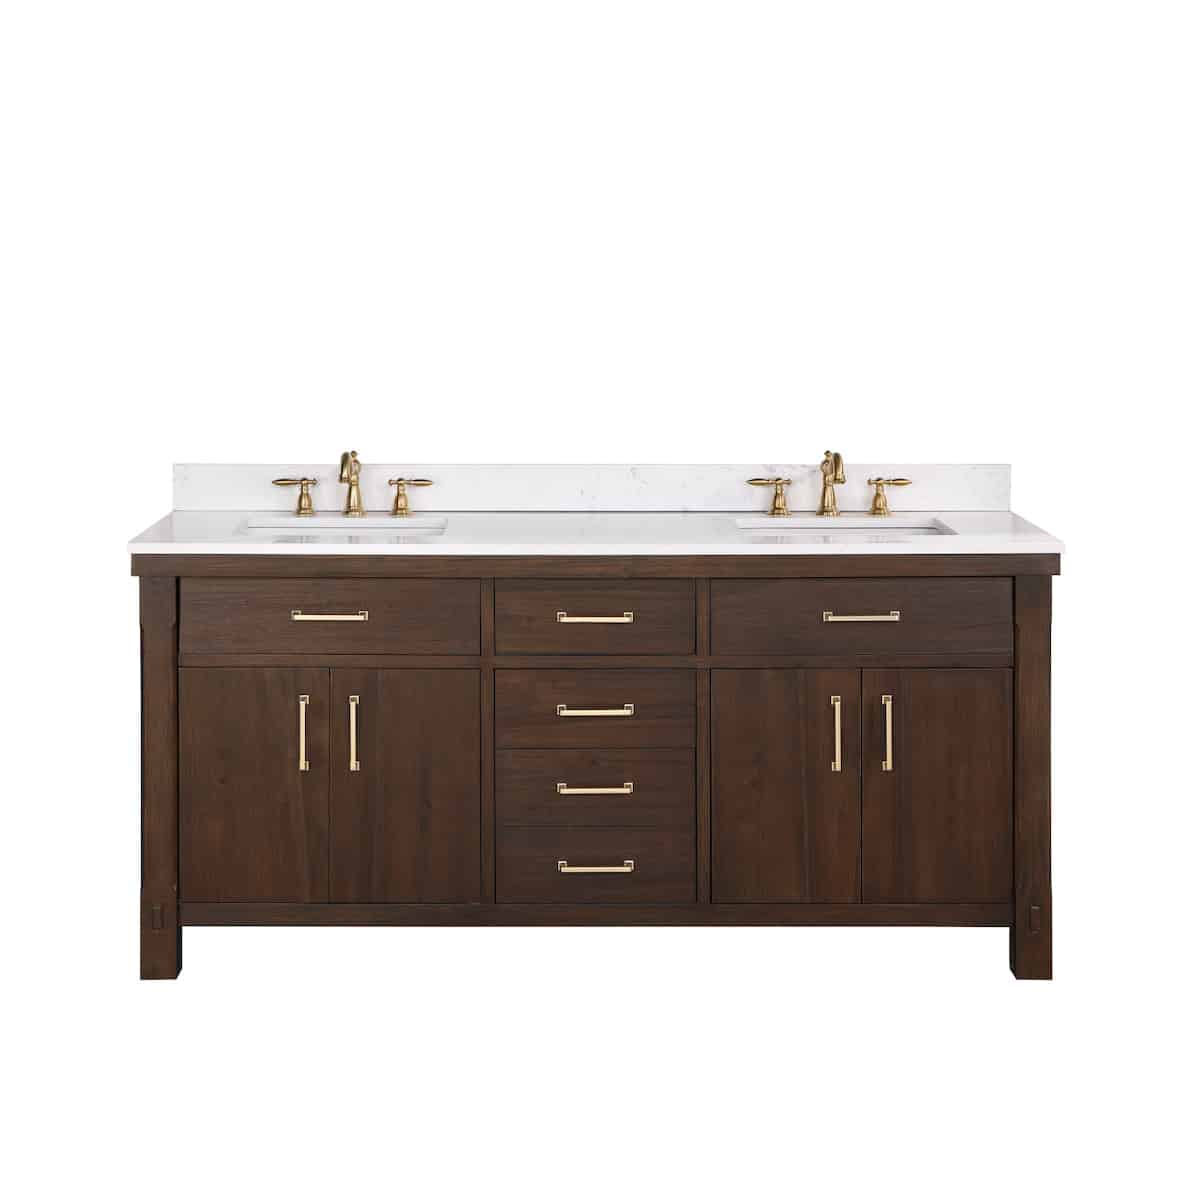 Vinnova Viella 72 Inch Freestanding Double Sink Bath Vanity in Deep Walnut Finish with White Composite Countertop Without Mirror 701872-DW-WS-NM